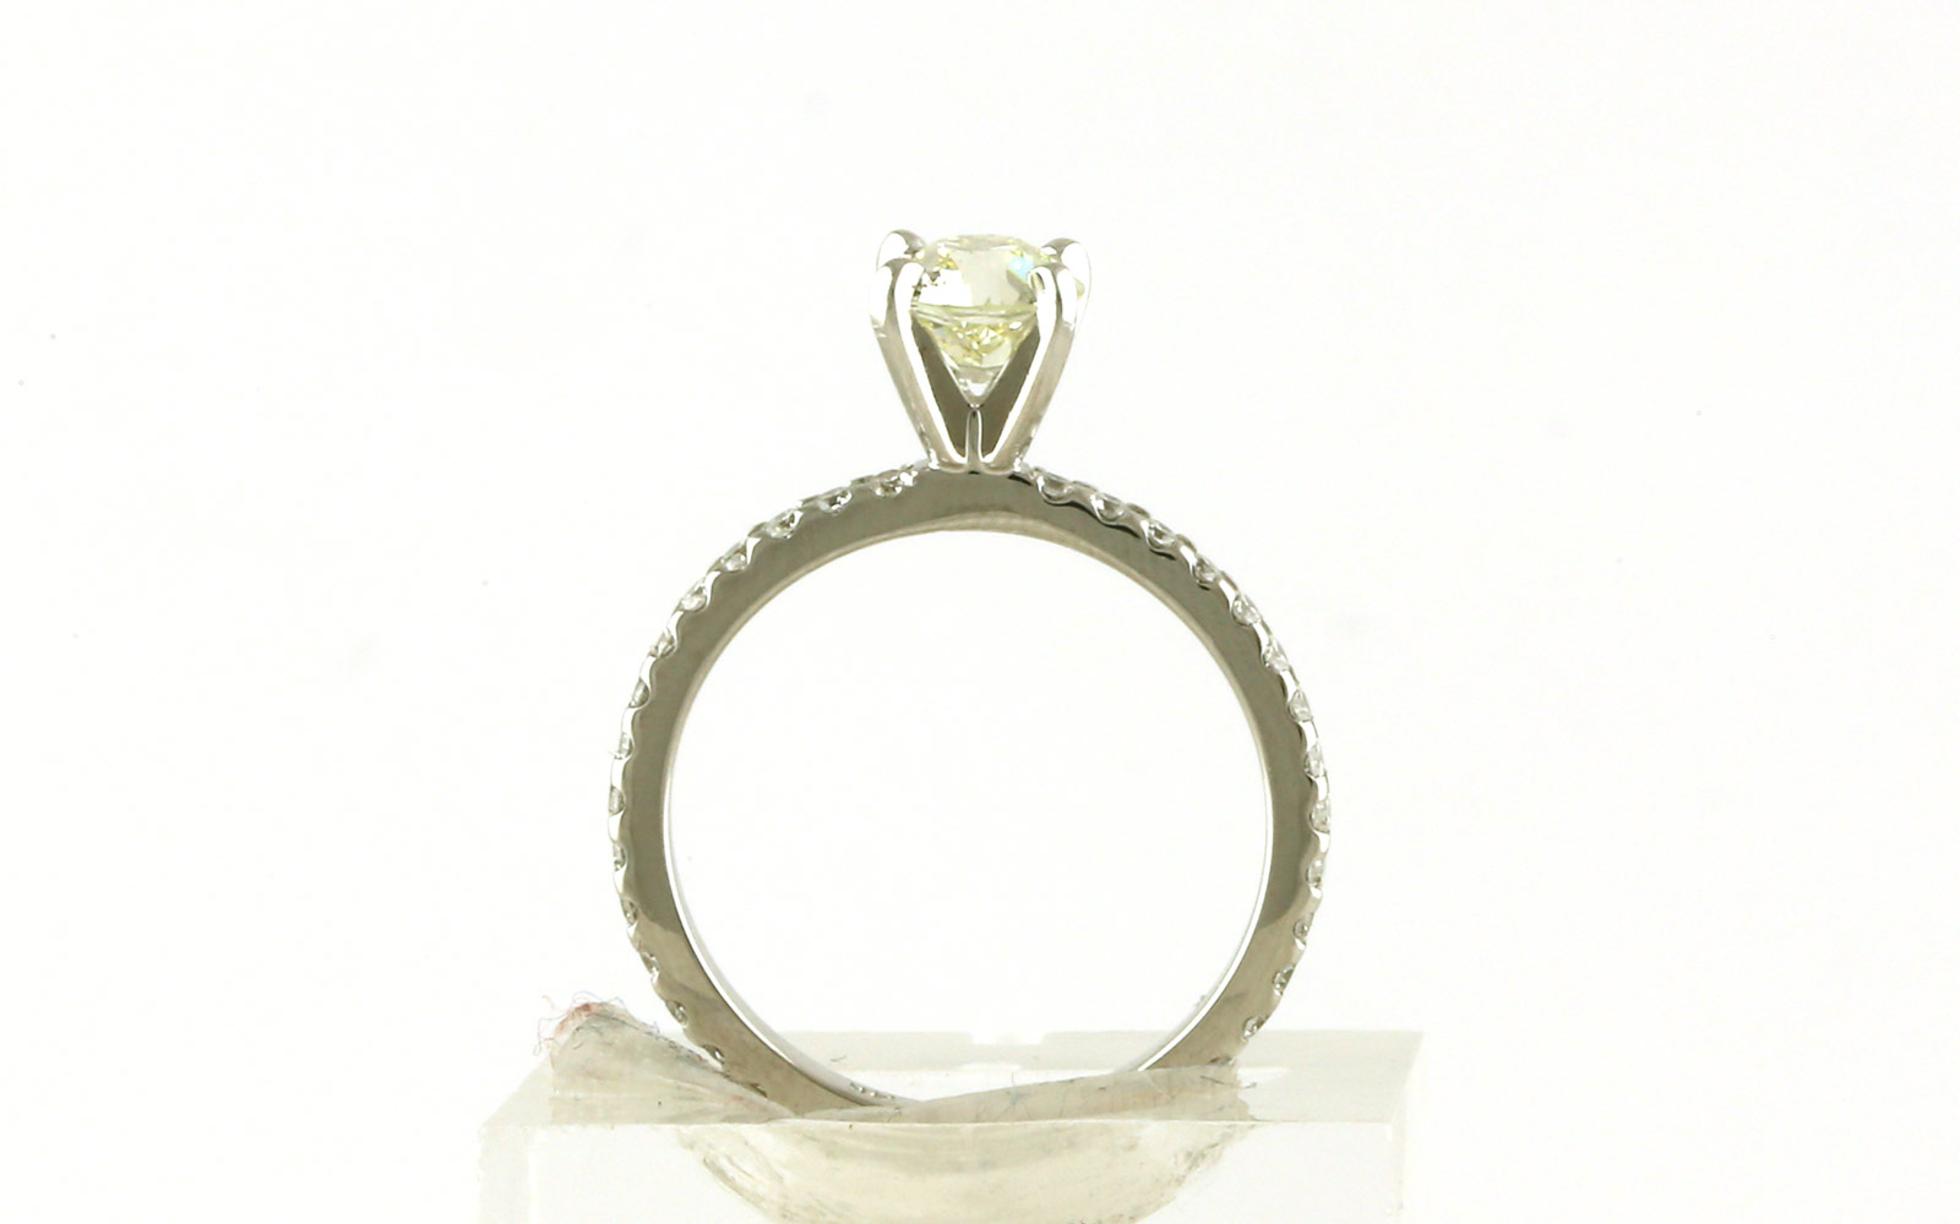 Pave-style Old European-cut Diamond Engagement Ring in White Gold (1.27cts TWT)